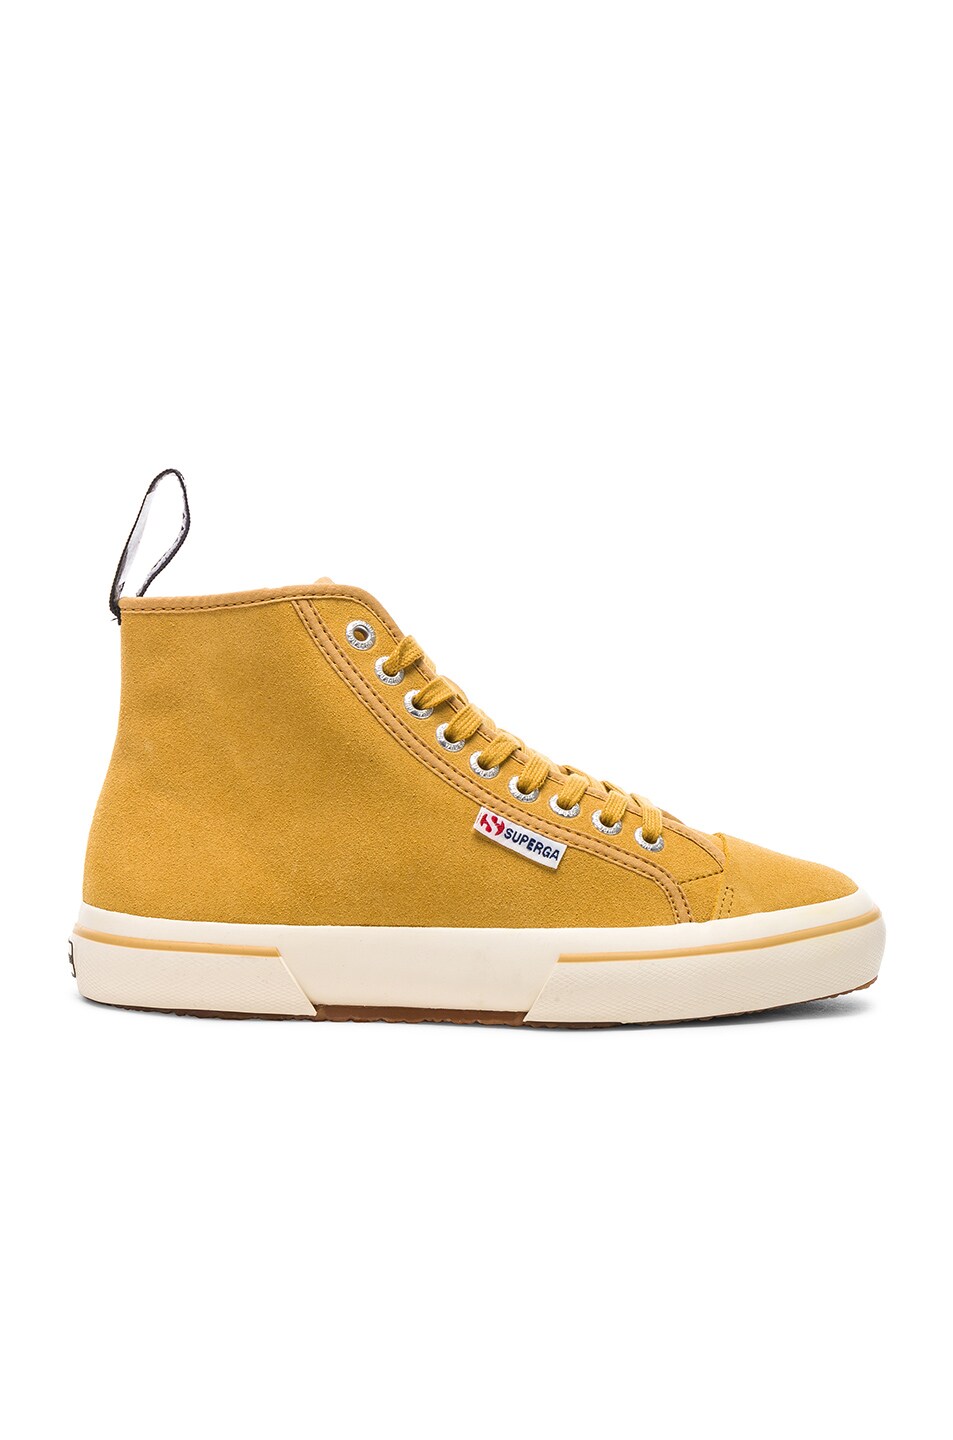 Image 1 of ALEXACHUNG x Superga High Top Suede Sneaker in Mustard Yellow